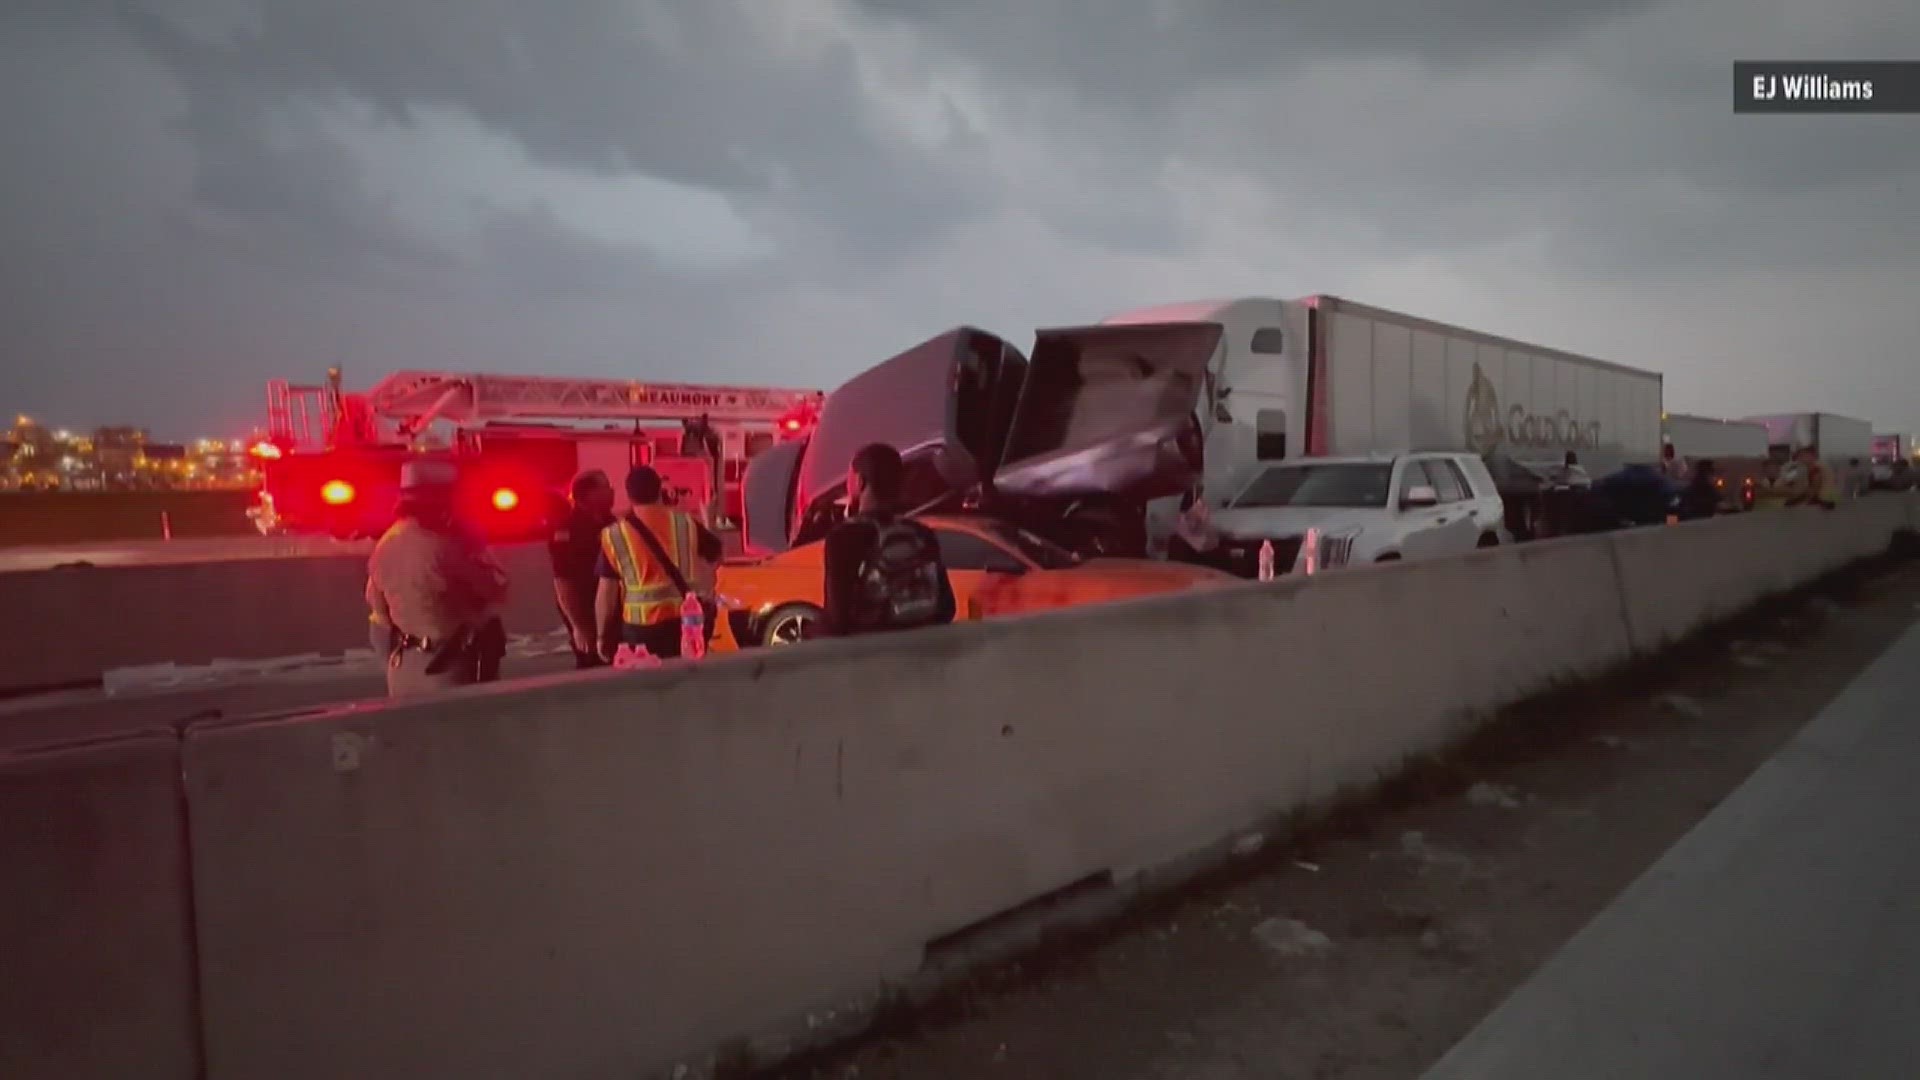 The wreck on Interstate 10 that left one person dead and three others seriously injured involved nine vehicles, according to the Texas Department of Public Safety.